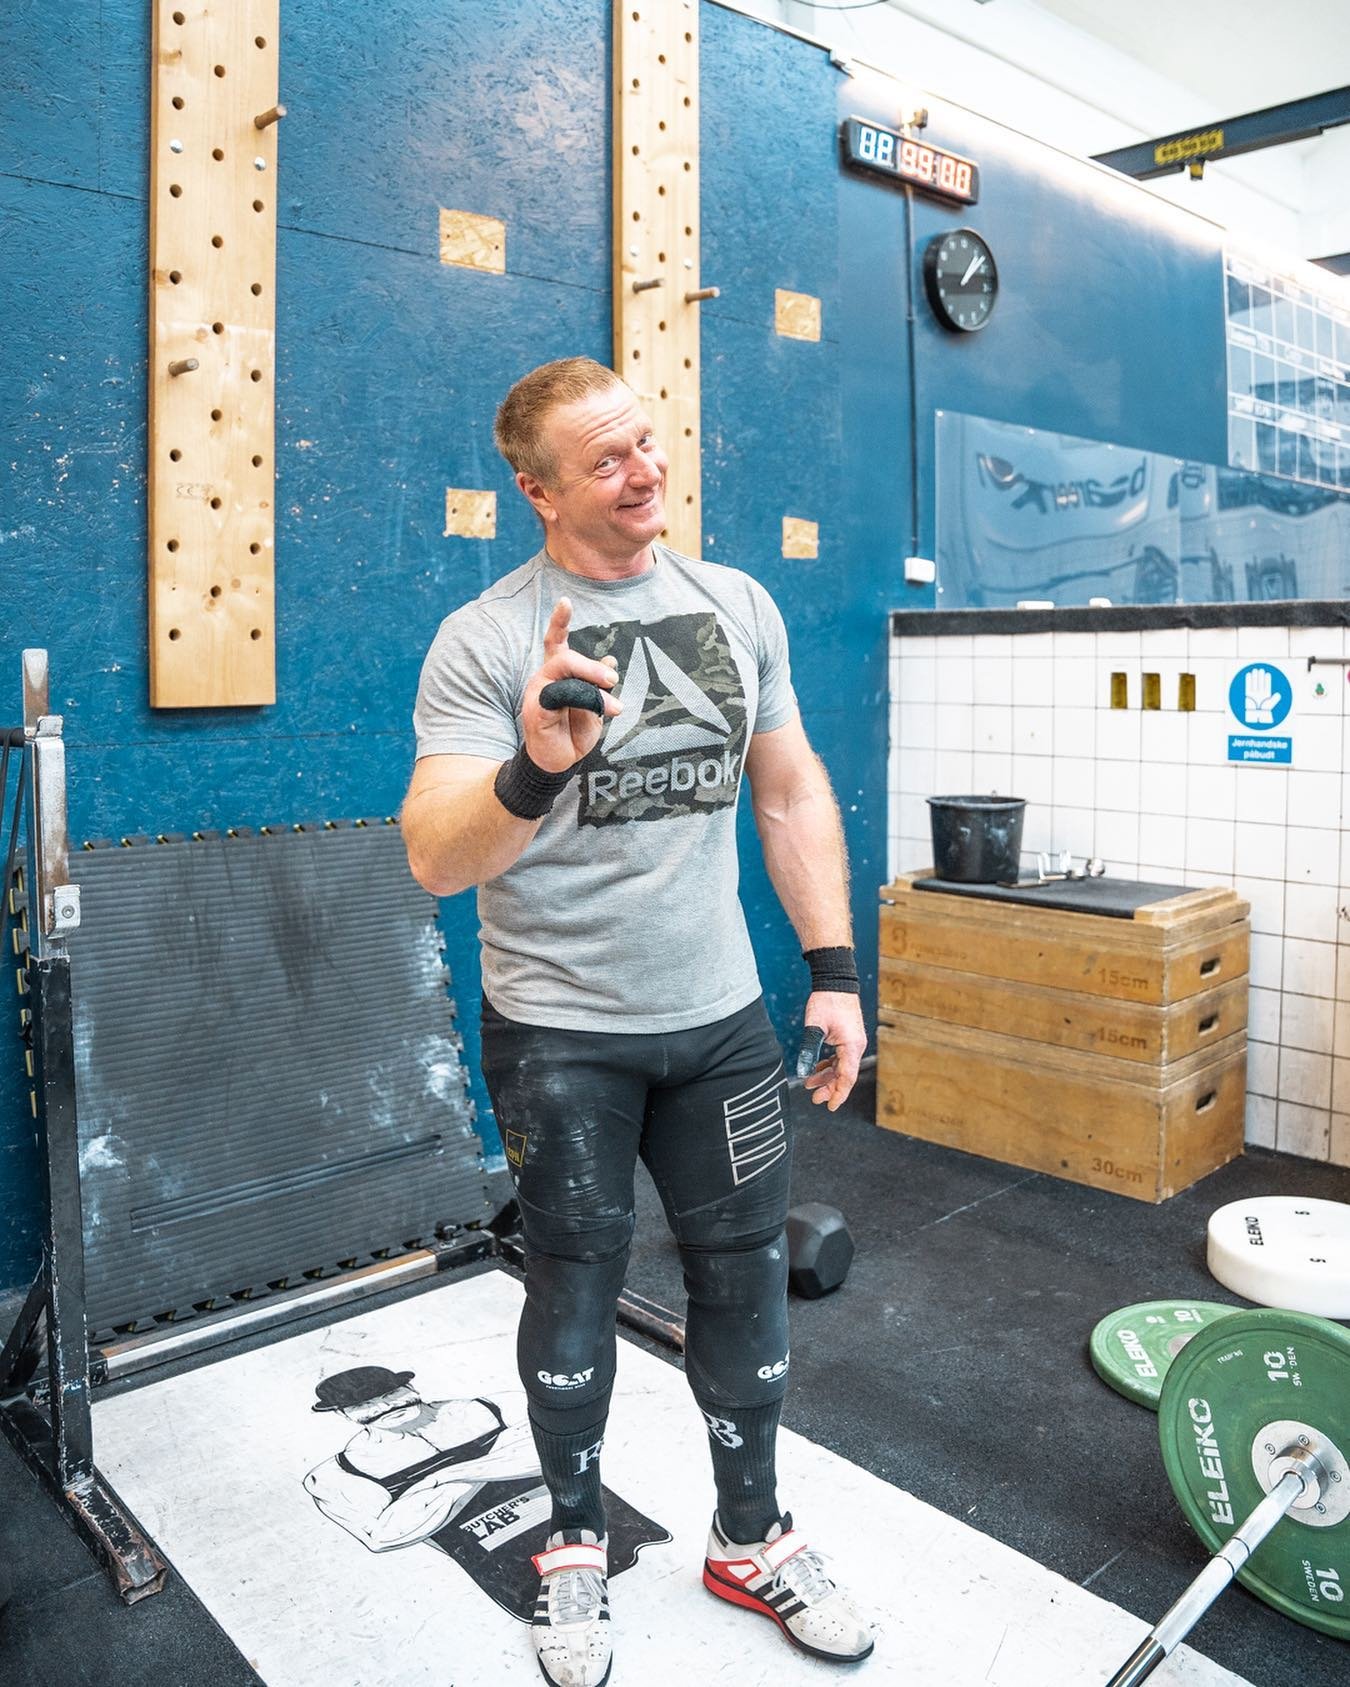 The CrossFit 2024 Individual Quarterfinals are underway 🔥

Sending a big shoutout to Morten S&oslash;nderskov, our Maintenance Assistant, who will be competing in the 60-64 age group quarterfinals.&nbsp;
He ranked 9th globally and 1st in Europe in t